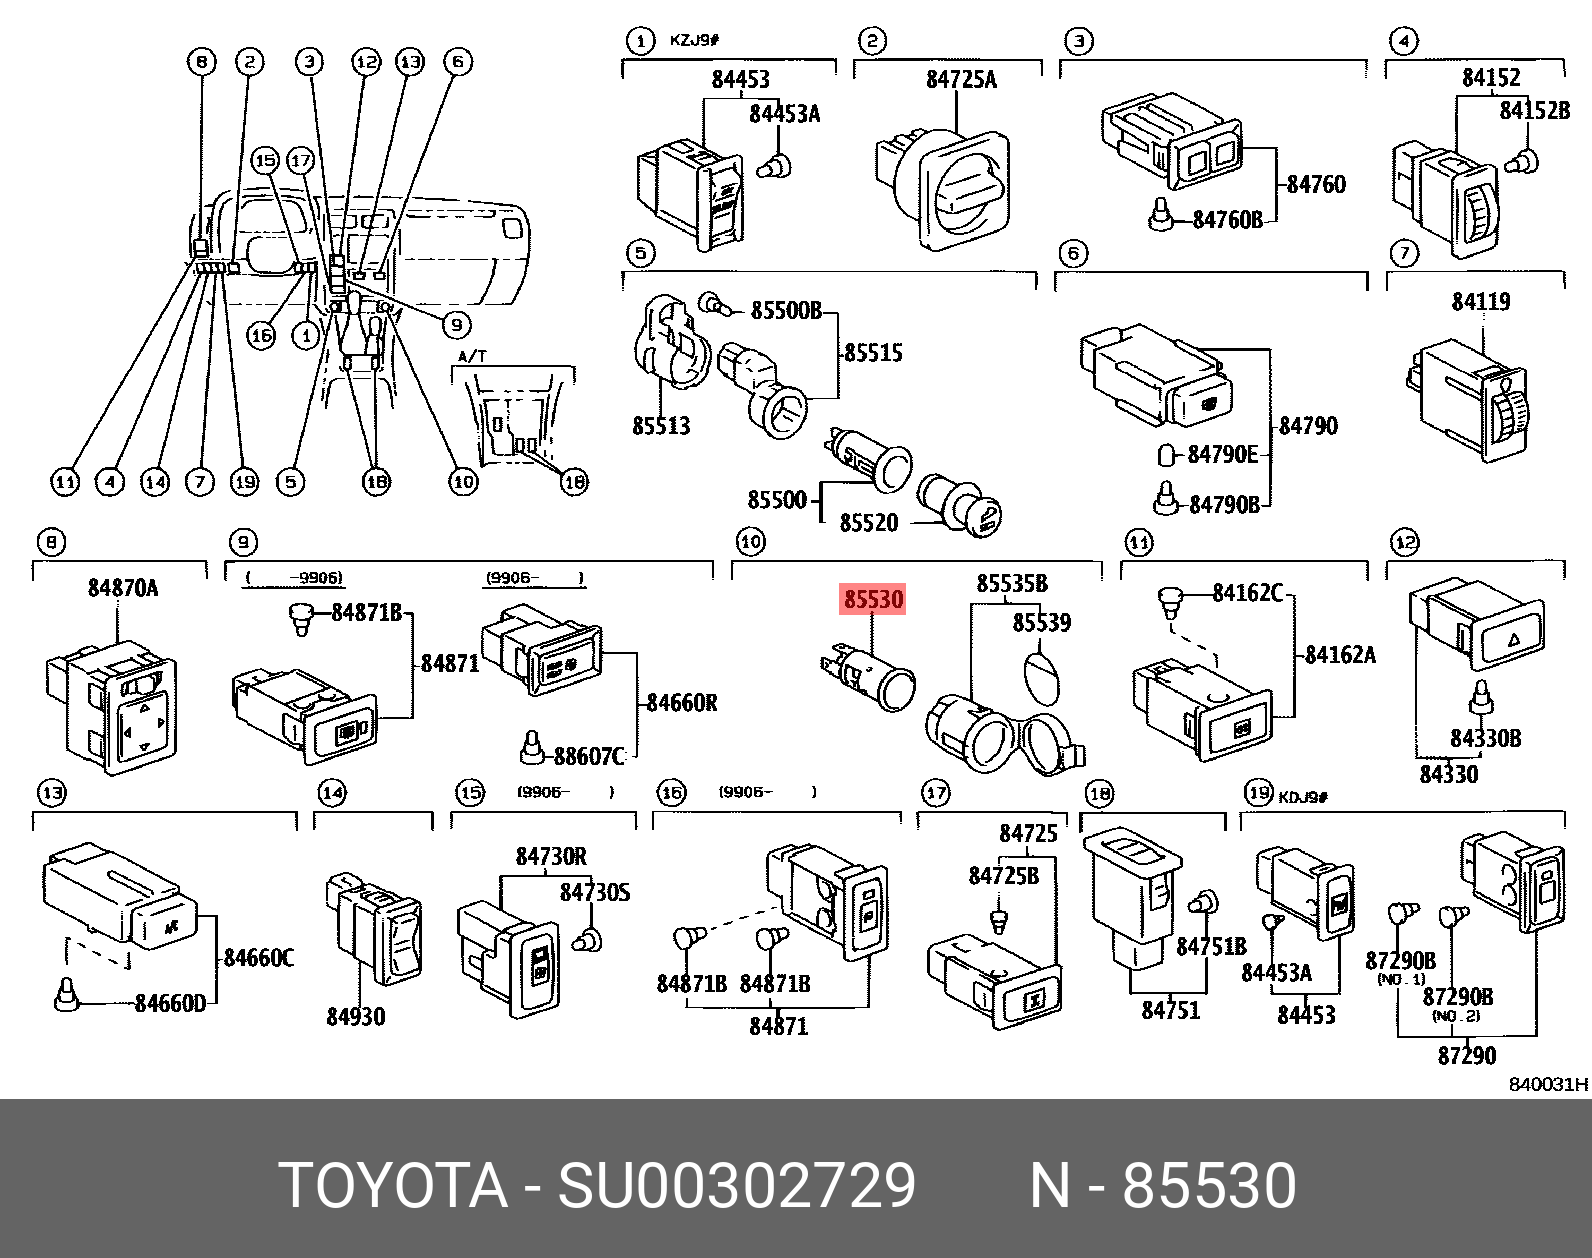 86 201608-, SOCKET ASSY, POWER OUTLET, NO.1